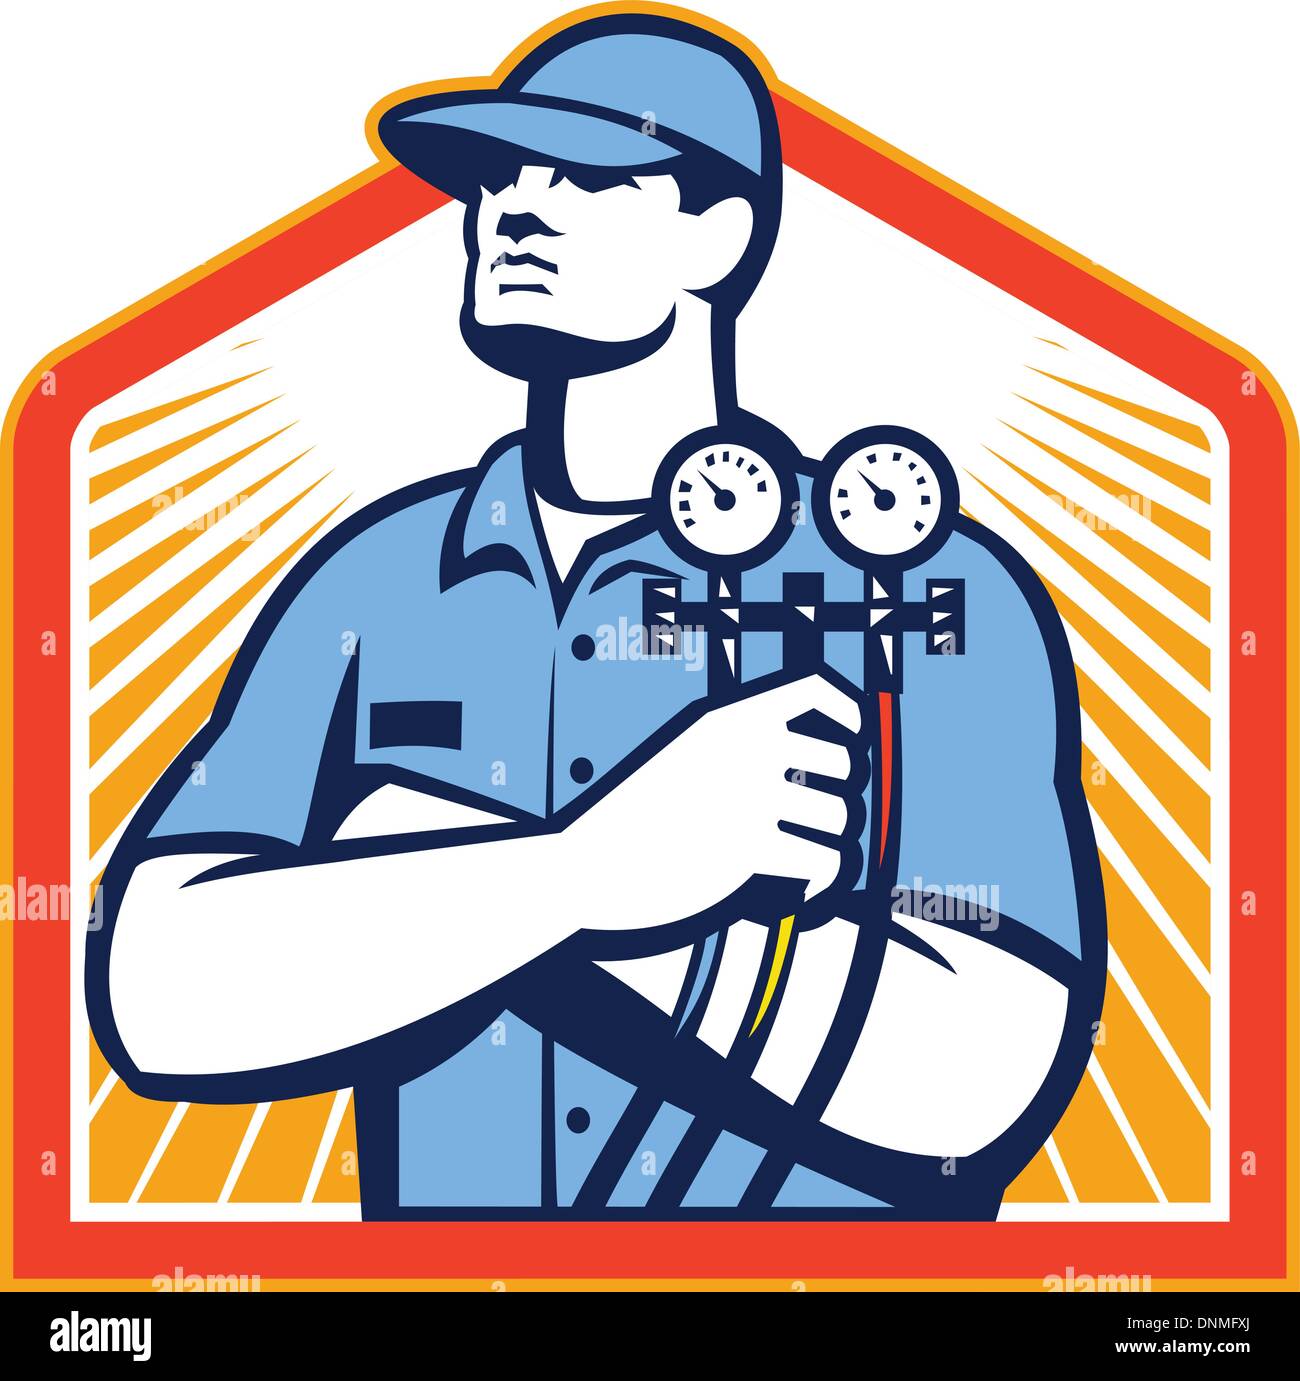 Illustration of a refrigeration and air conditioning mechanic holding a pressure temperature gauge front view set inside shield Stock Vector